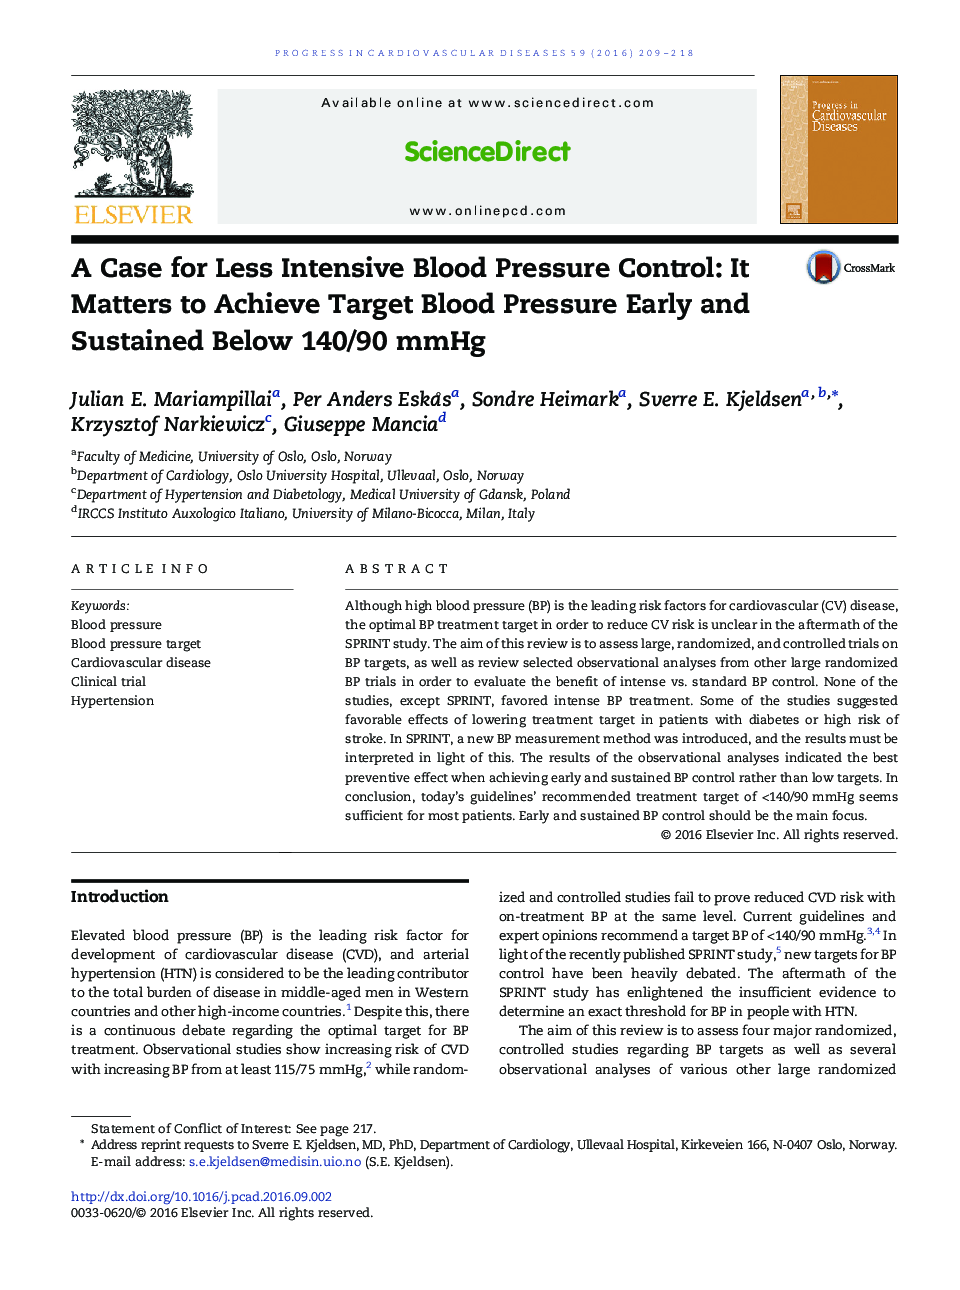 A Case for Less Intensive Blood Pressure Control: It Matters to Achieve Target Blood Pressure Early and Sustained Below 140/90Â mmHg